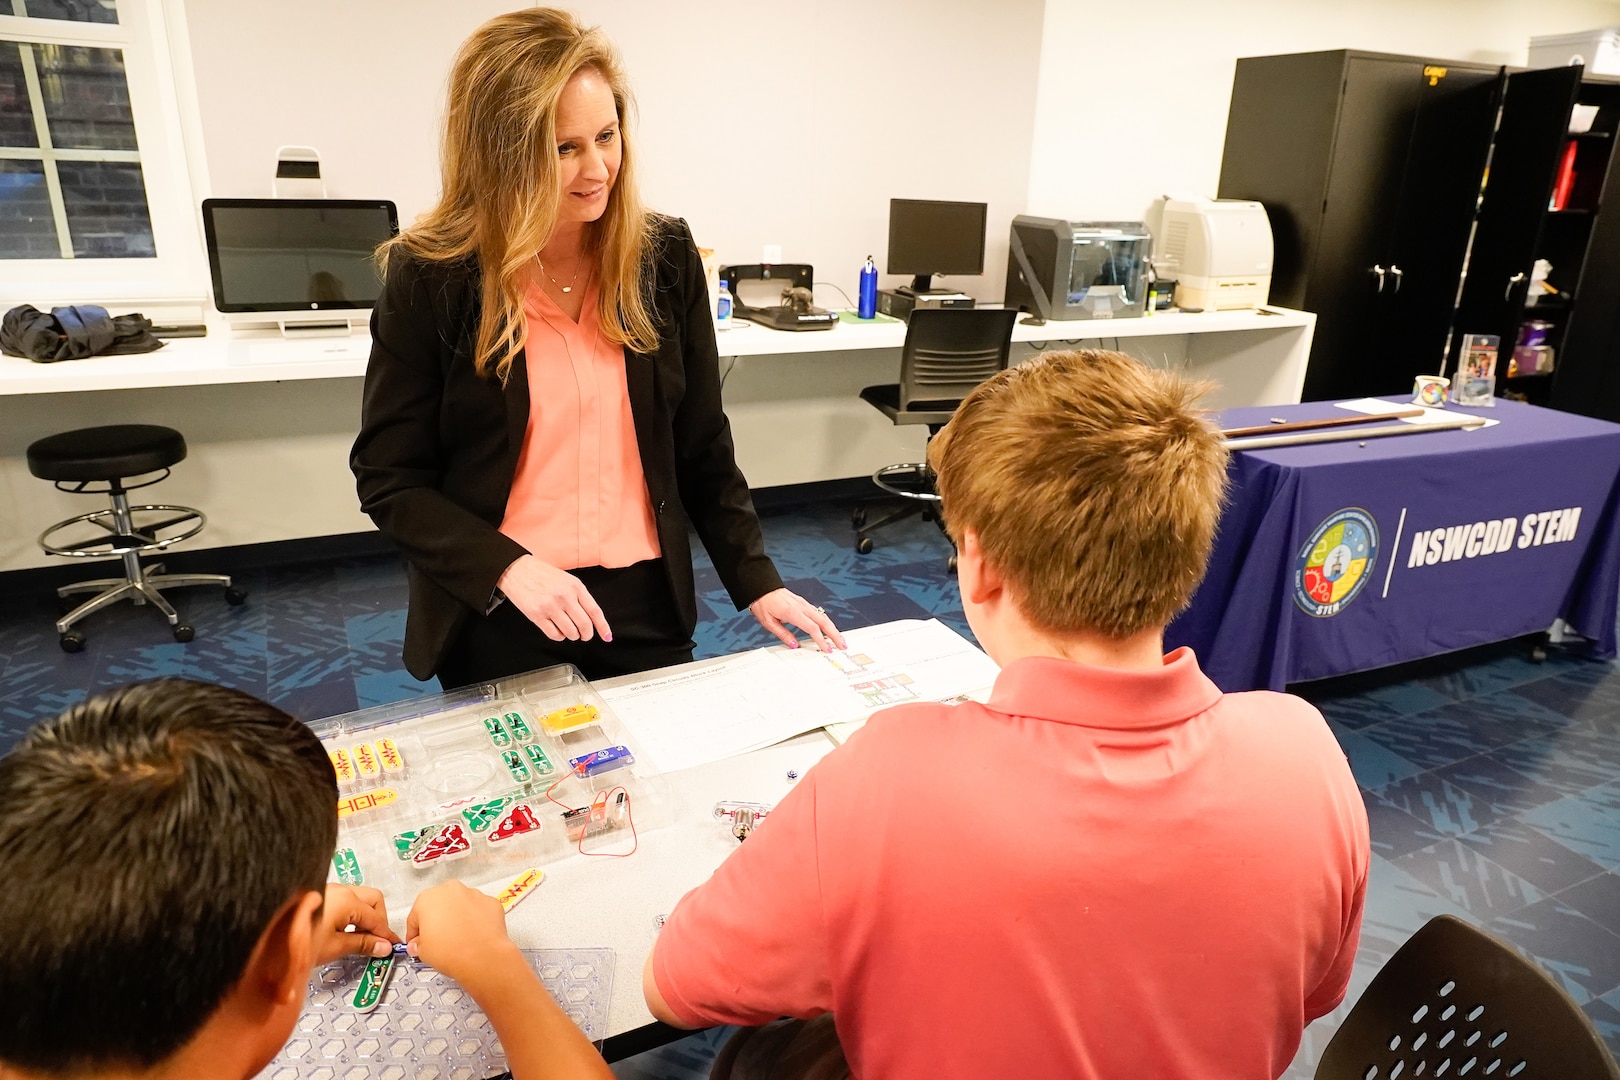 IMAGE: Naval Surface Warfare Center Dahlgren Division (NSWCDD) Chief Technology Officer Jennifer Clift works with a pair of Drew Middle School students as they complete a snap circuit board project during a STEM event at the University of Mary Washington’s (UMW) Seacobeck Hall. NSWCDD partnered with UMW faculty and UMW College of Education students to host the event. (U.S. Navy Photos/Released)